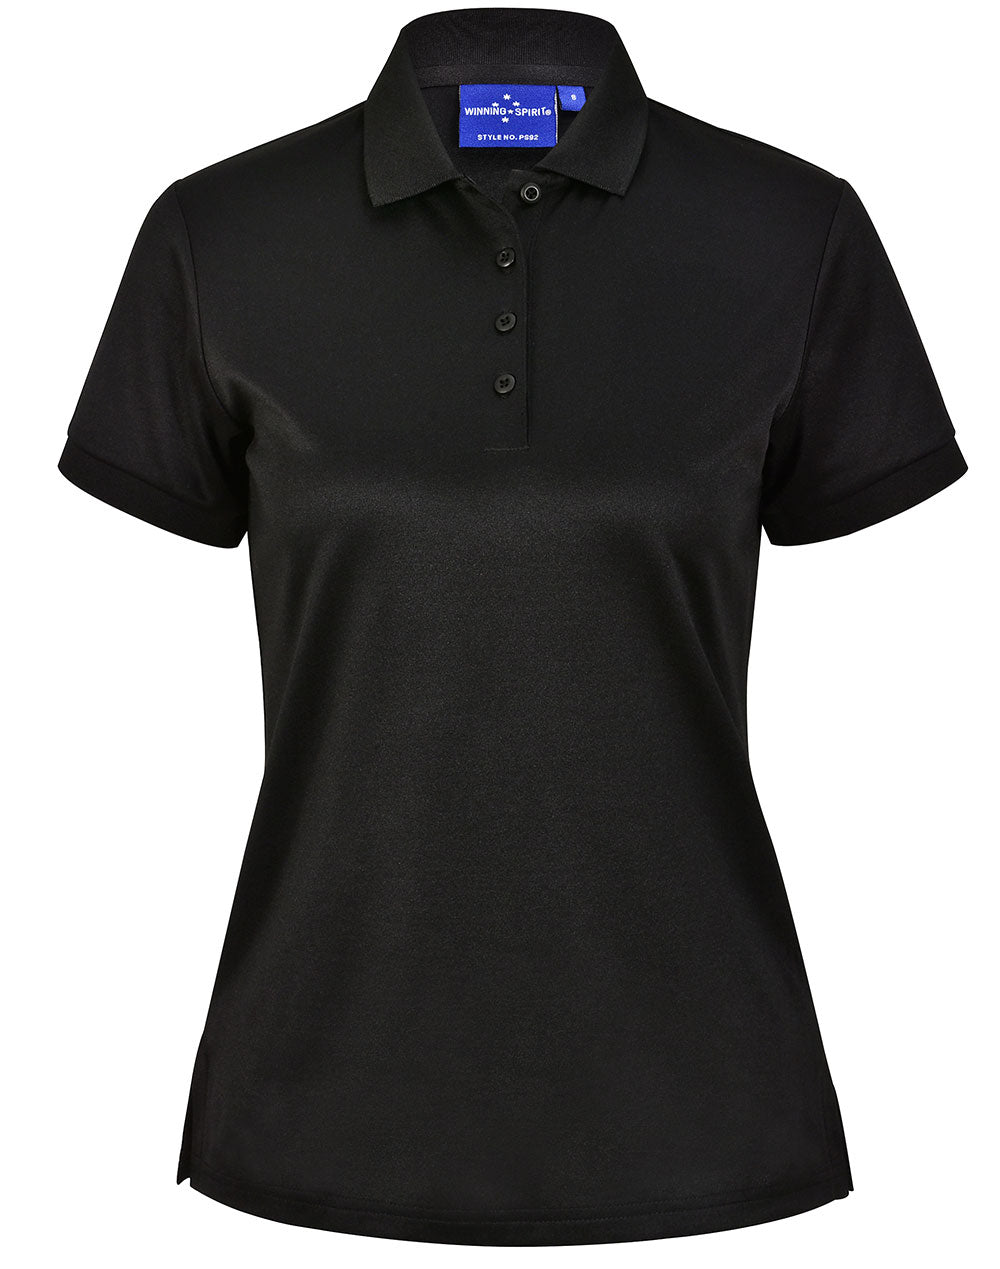 Winning Spirit Ladie's Sustainable Poly/Cotton Corporate Polo PS92 - Simply Scrubs Australia